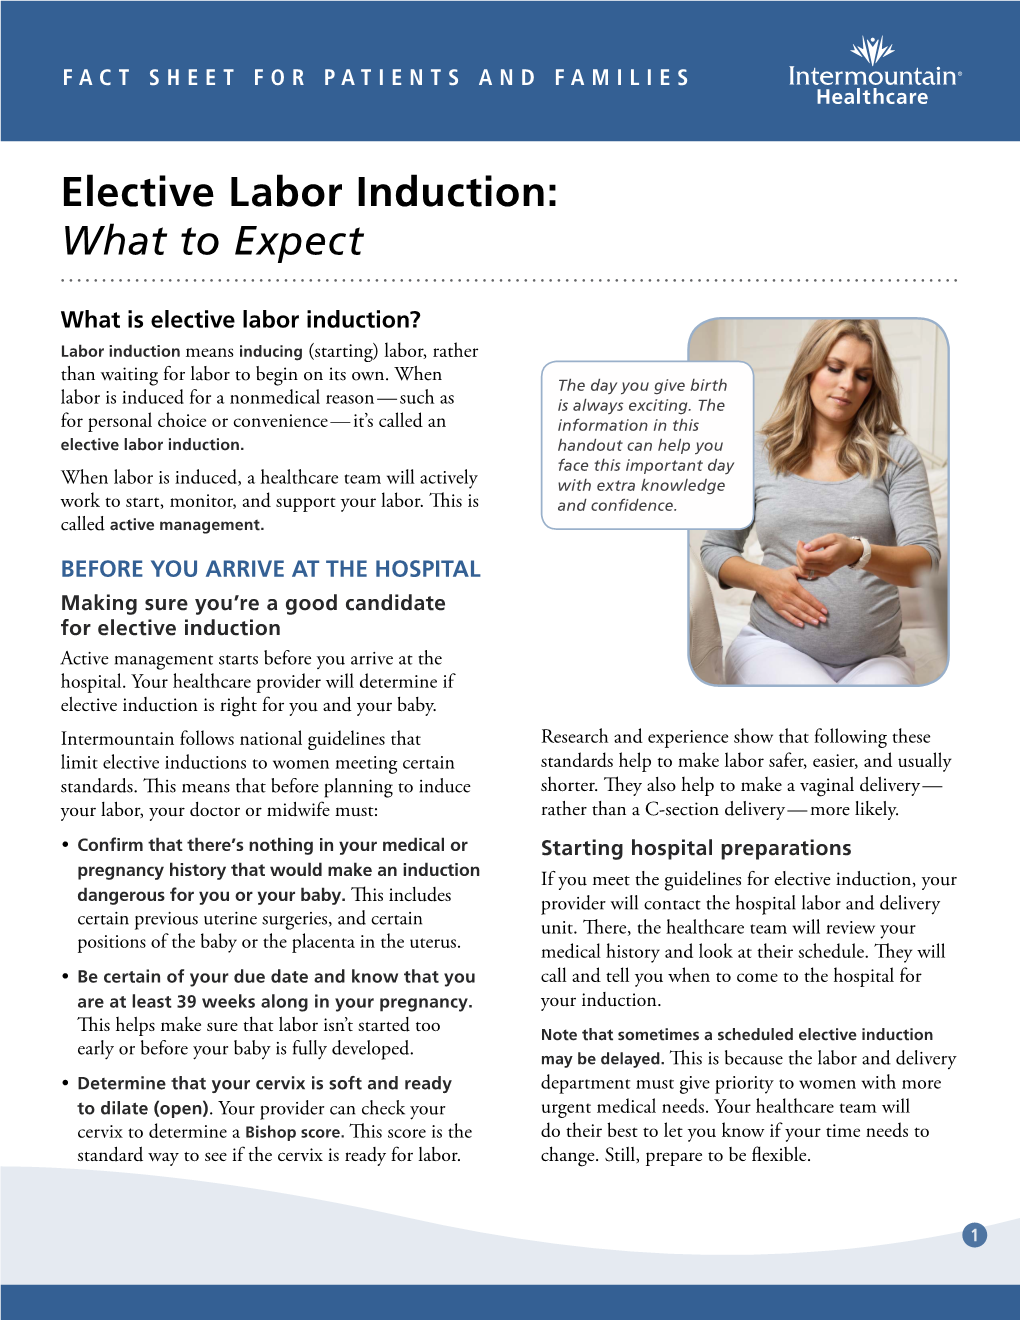 Elective Labor Induction: What to Expect